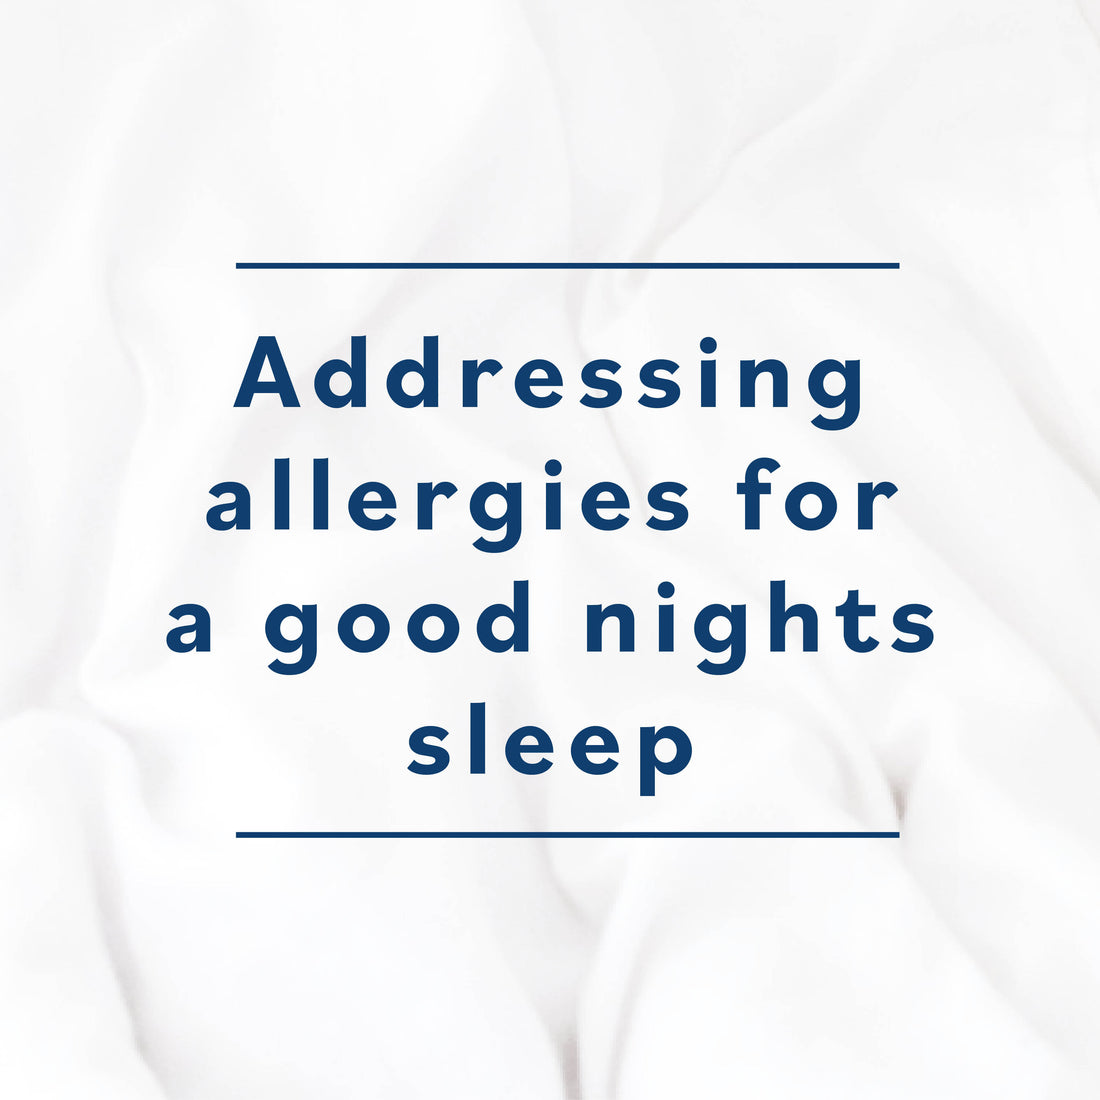 Text that says "addressing allergies for good nights sleep".